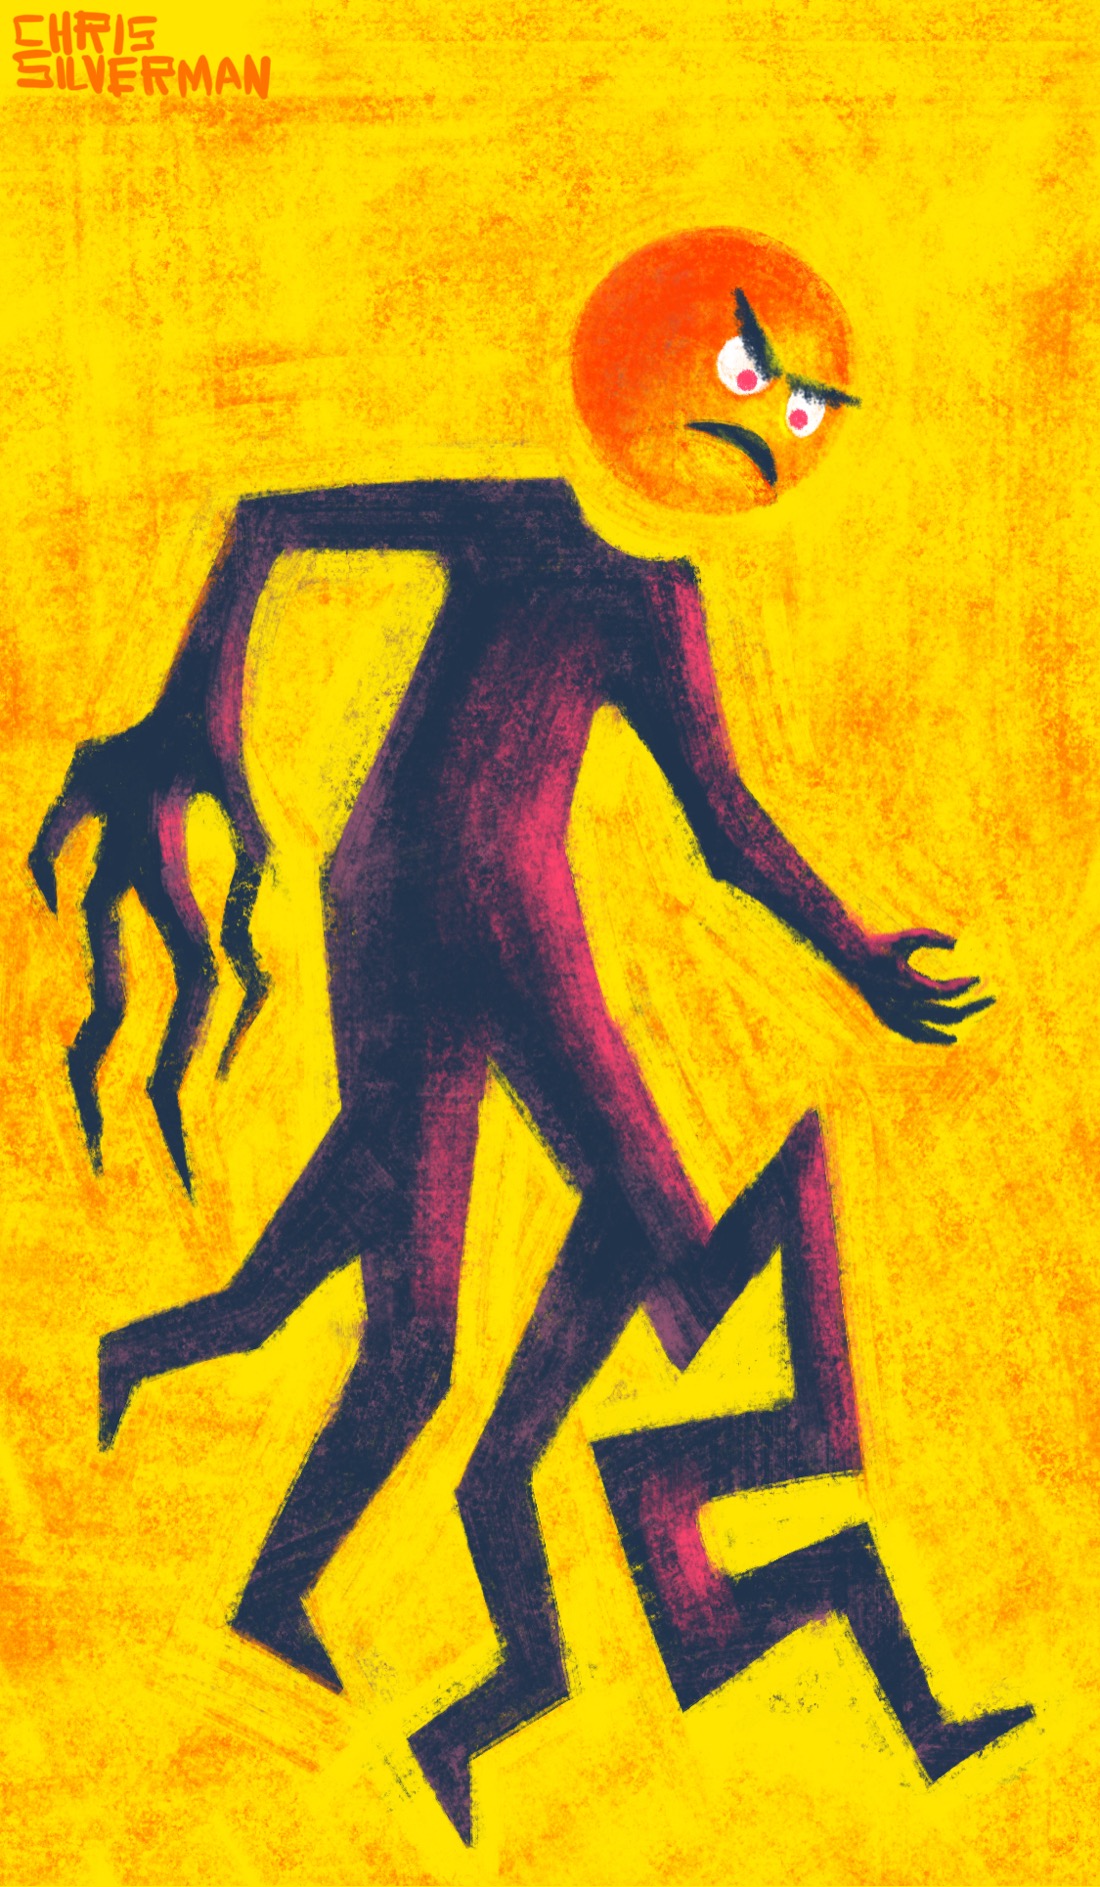 A bizarre, humanoid figure with two arms and four legs. The legs start at two and then branch off into four, forking like lightning bolts. The left arm of the figure is normal; the right has a giant hand with jagged lightning-bolt fingers. The figure's body is a purpleish black, while its head is a simple red sphere with an angry emoji-like face on it. It is on a yellow background.